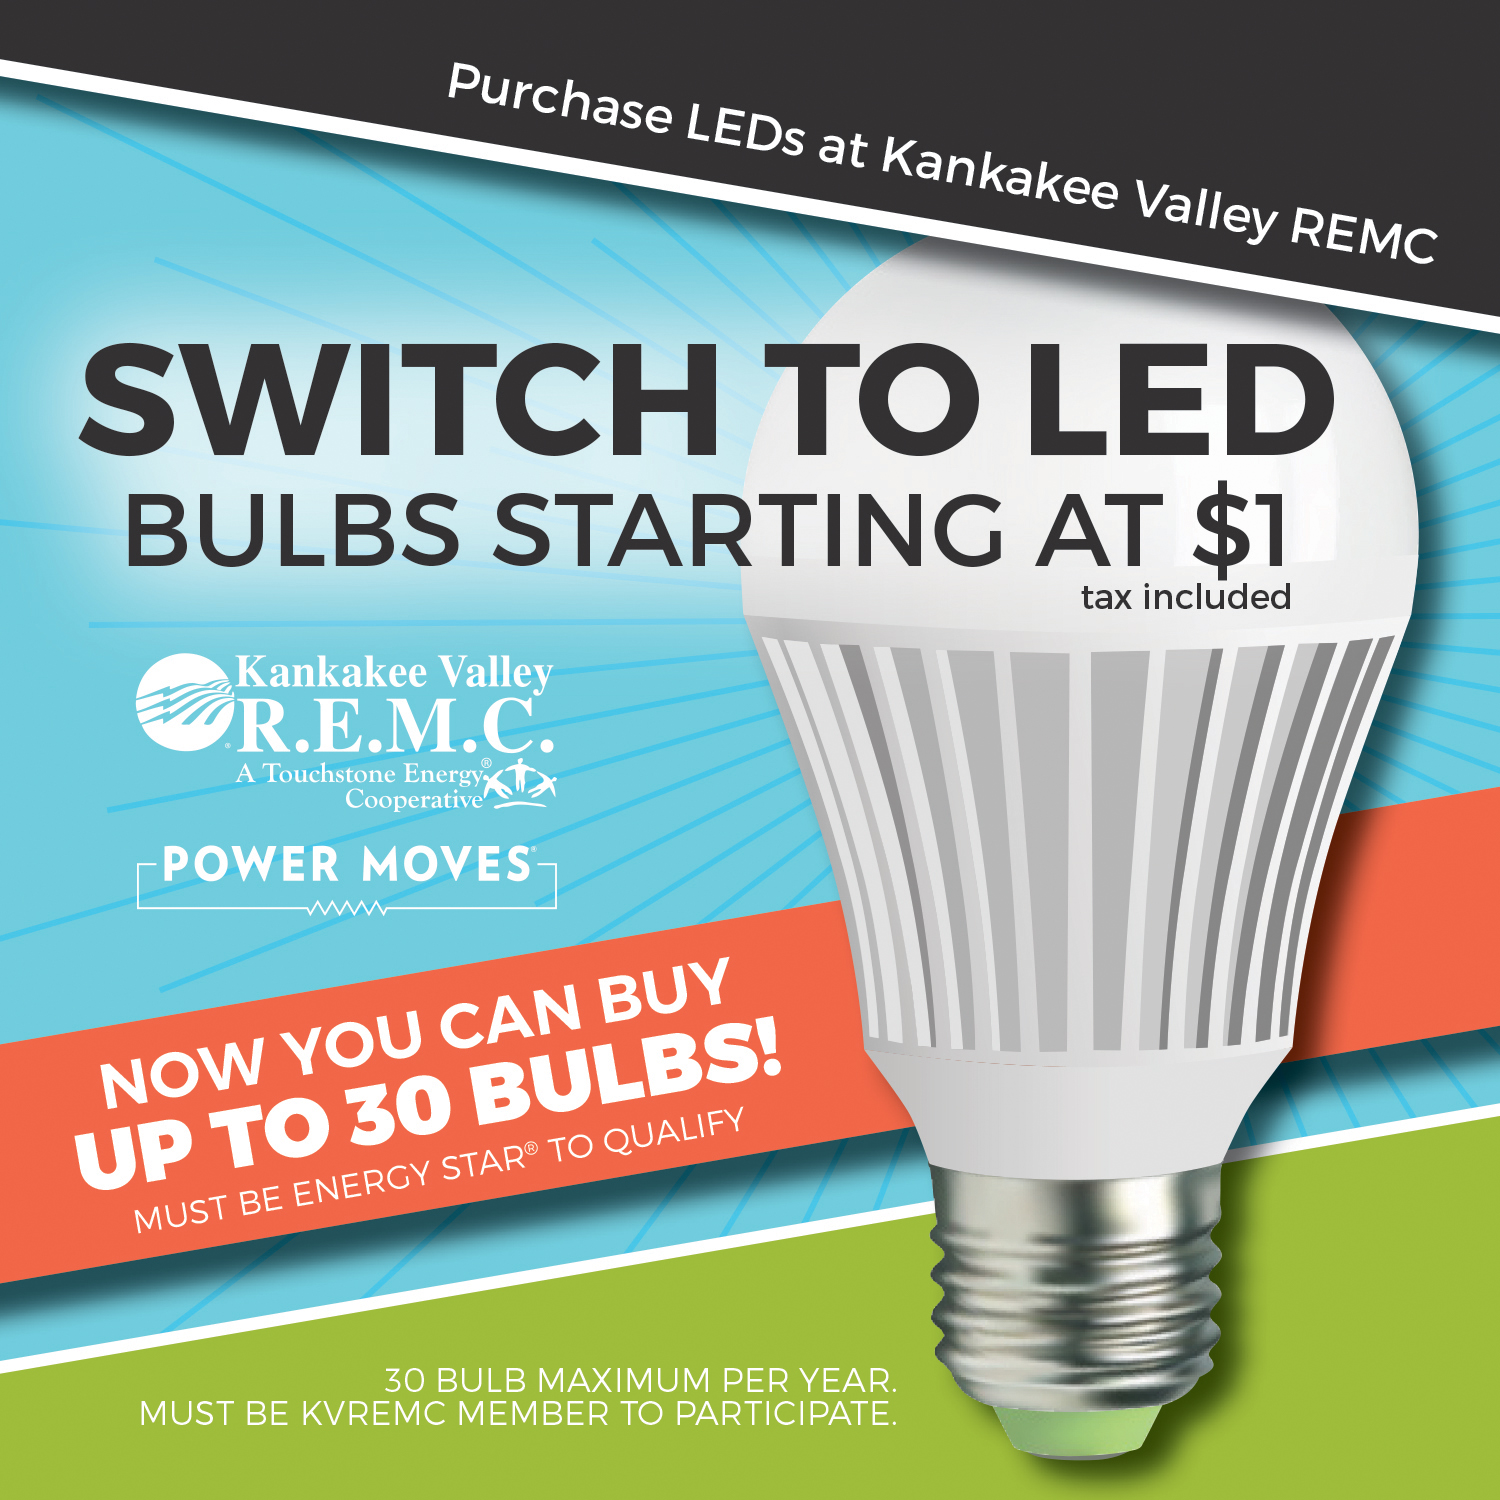 led-rebates-are-back-indiana-connection